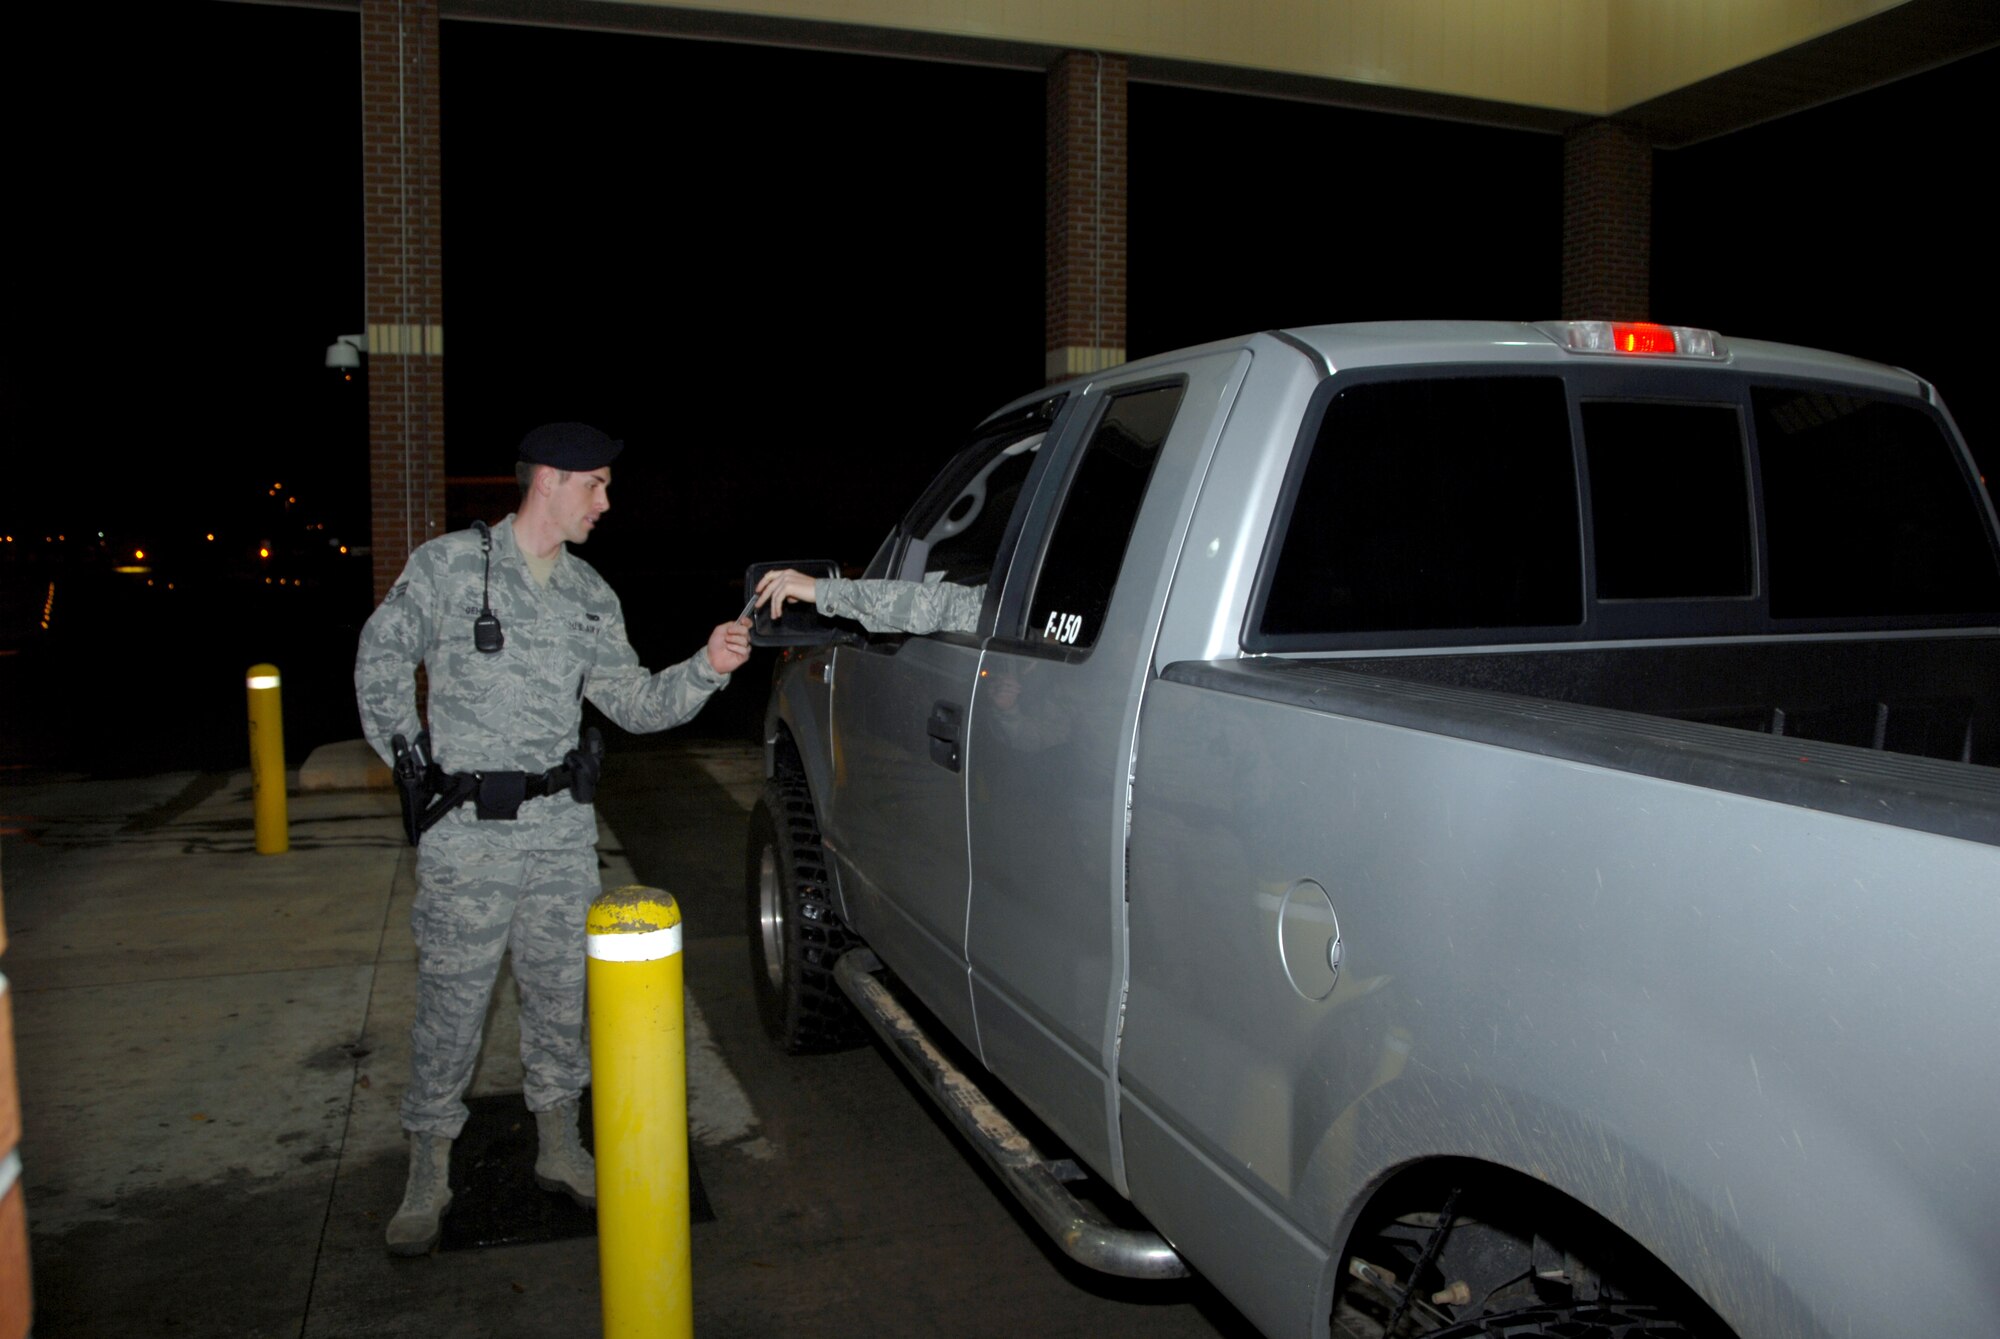 Senior Airman Christopher Gehrke, base entry controller, is one of many with the 78th Security Forces who work the midshift to help keep Robins safe after dark.